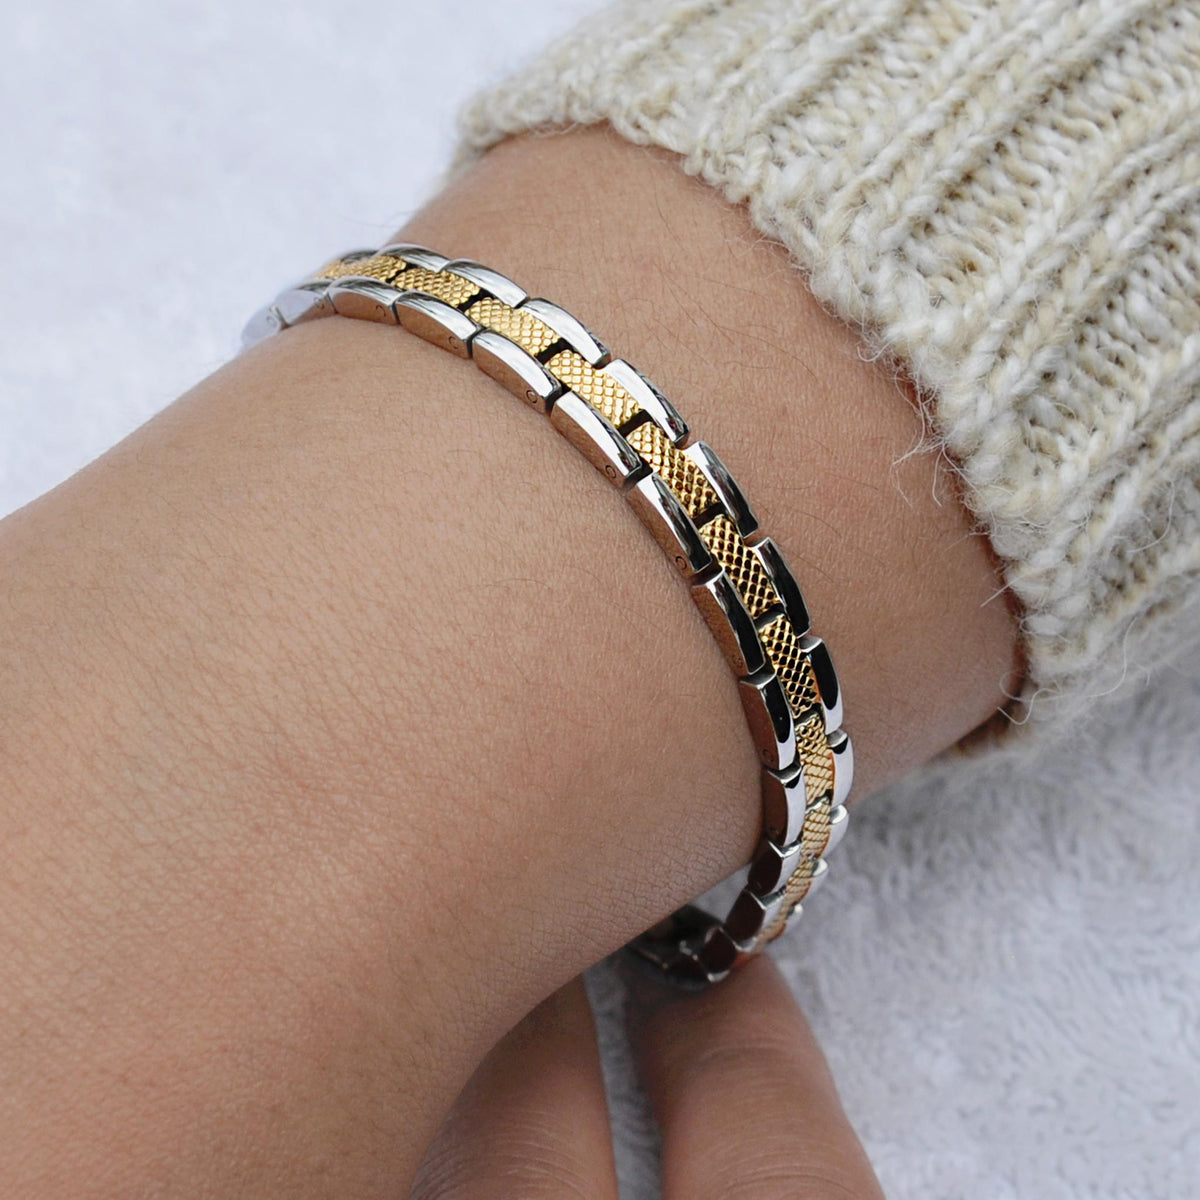 Magnetic bracelets for women 10 of the best styles to choose from